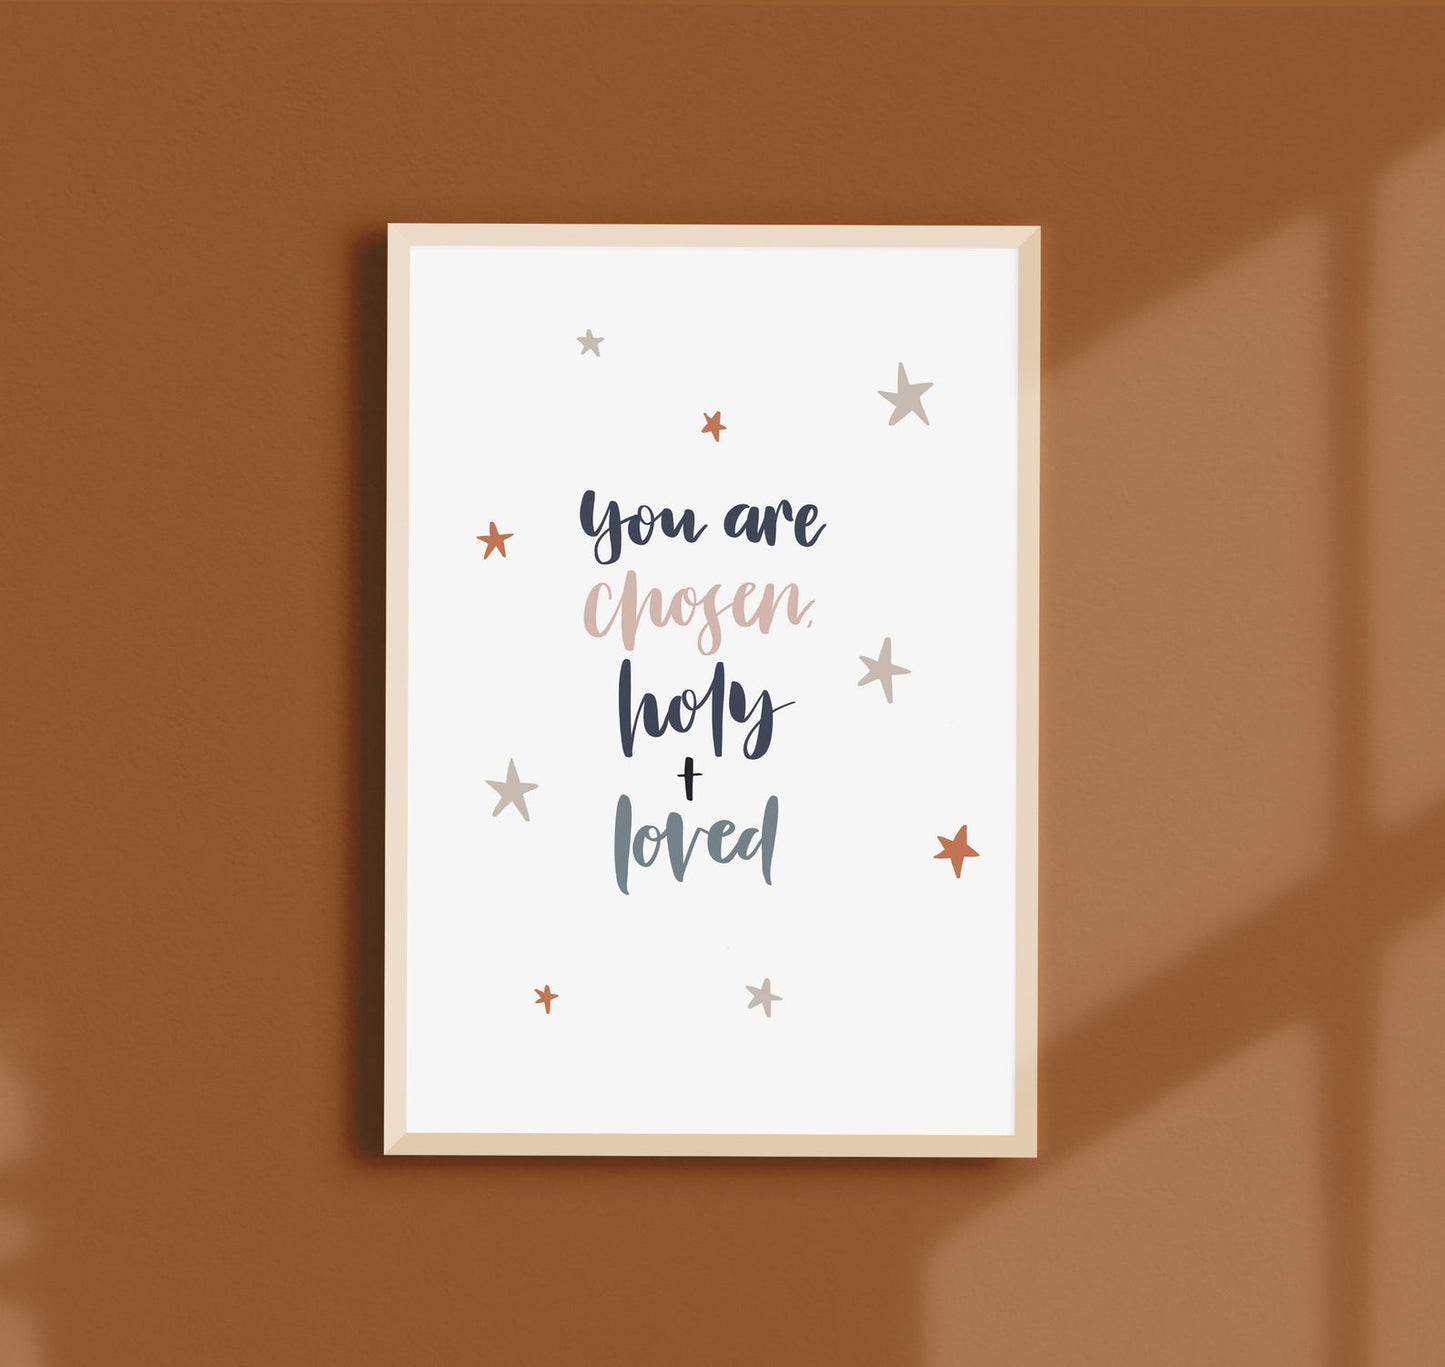 Nursery Print - You are chosen, holy and loved